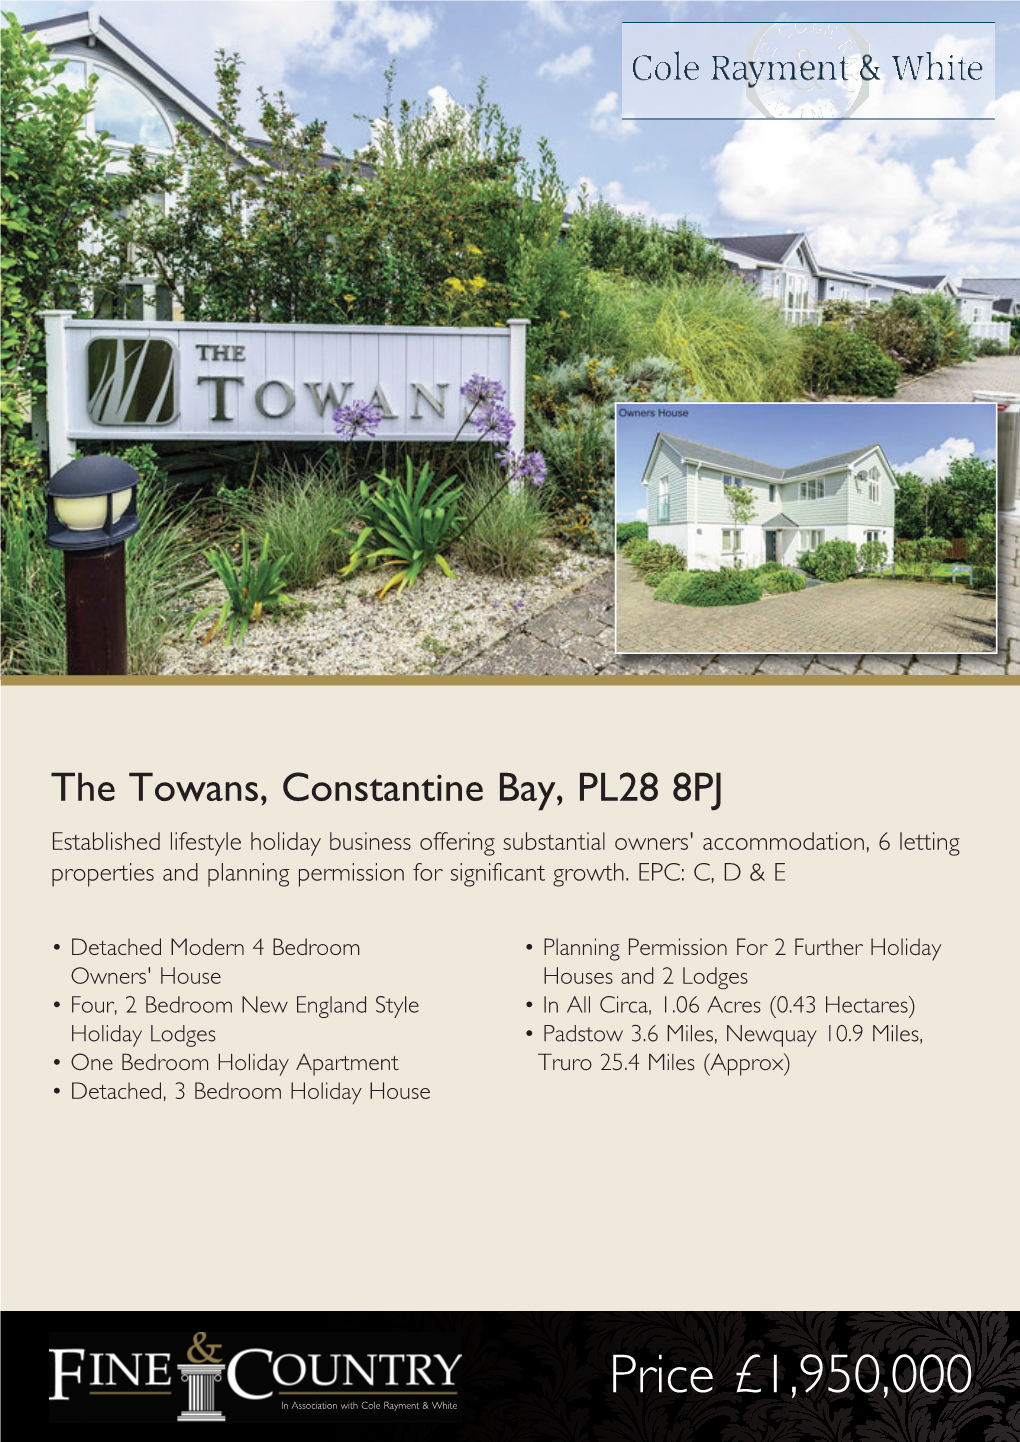 Price £1,950,000 LOCATION - the Towans Is Located Near Constantine Bay on the North Cornwall Coast, in Arguably One of the Most Popular Holiday Destinations in the UK